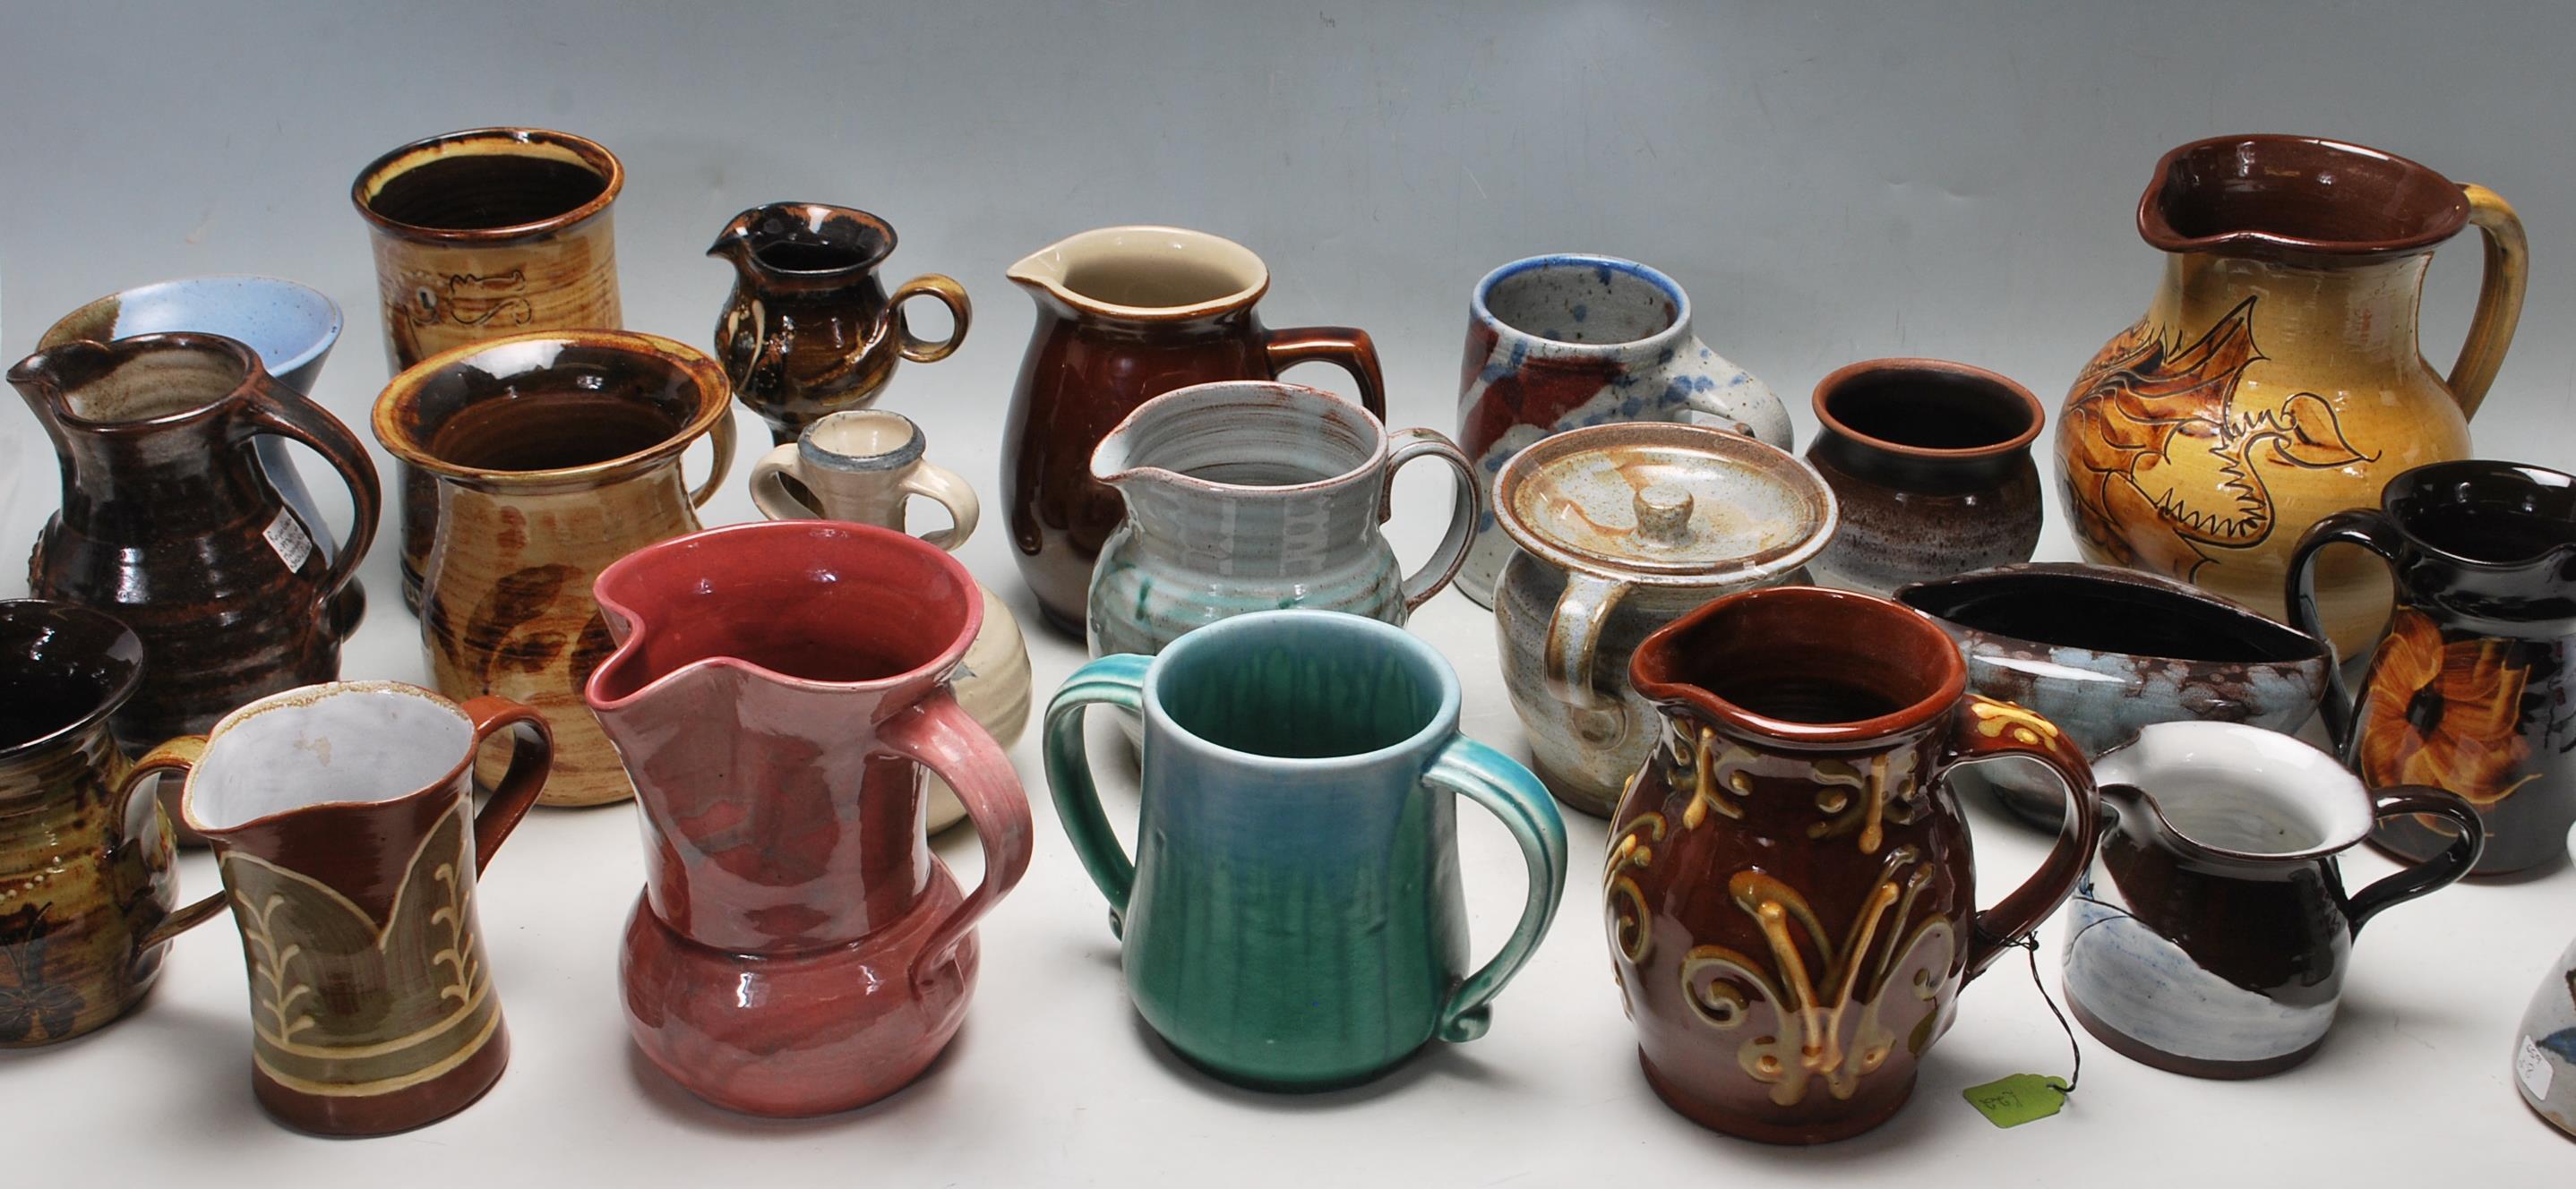 A LARGE COLLECTION OF VINTAGE 20TH CENTURY ART STUDIO POTTERY VASES AND JUGS